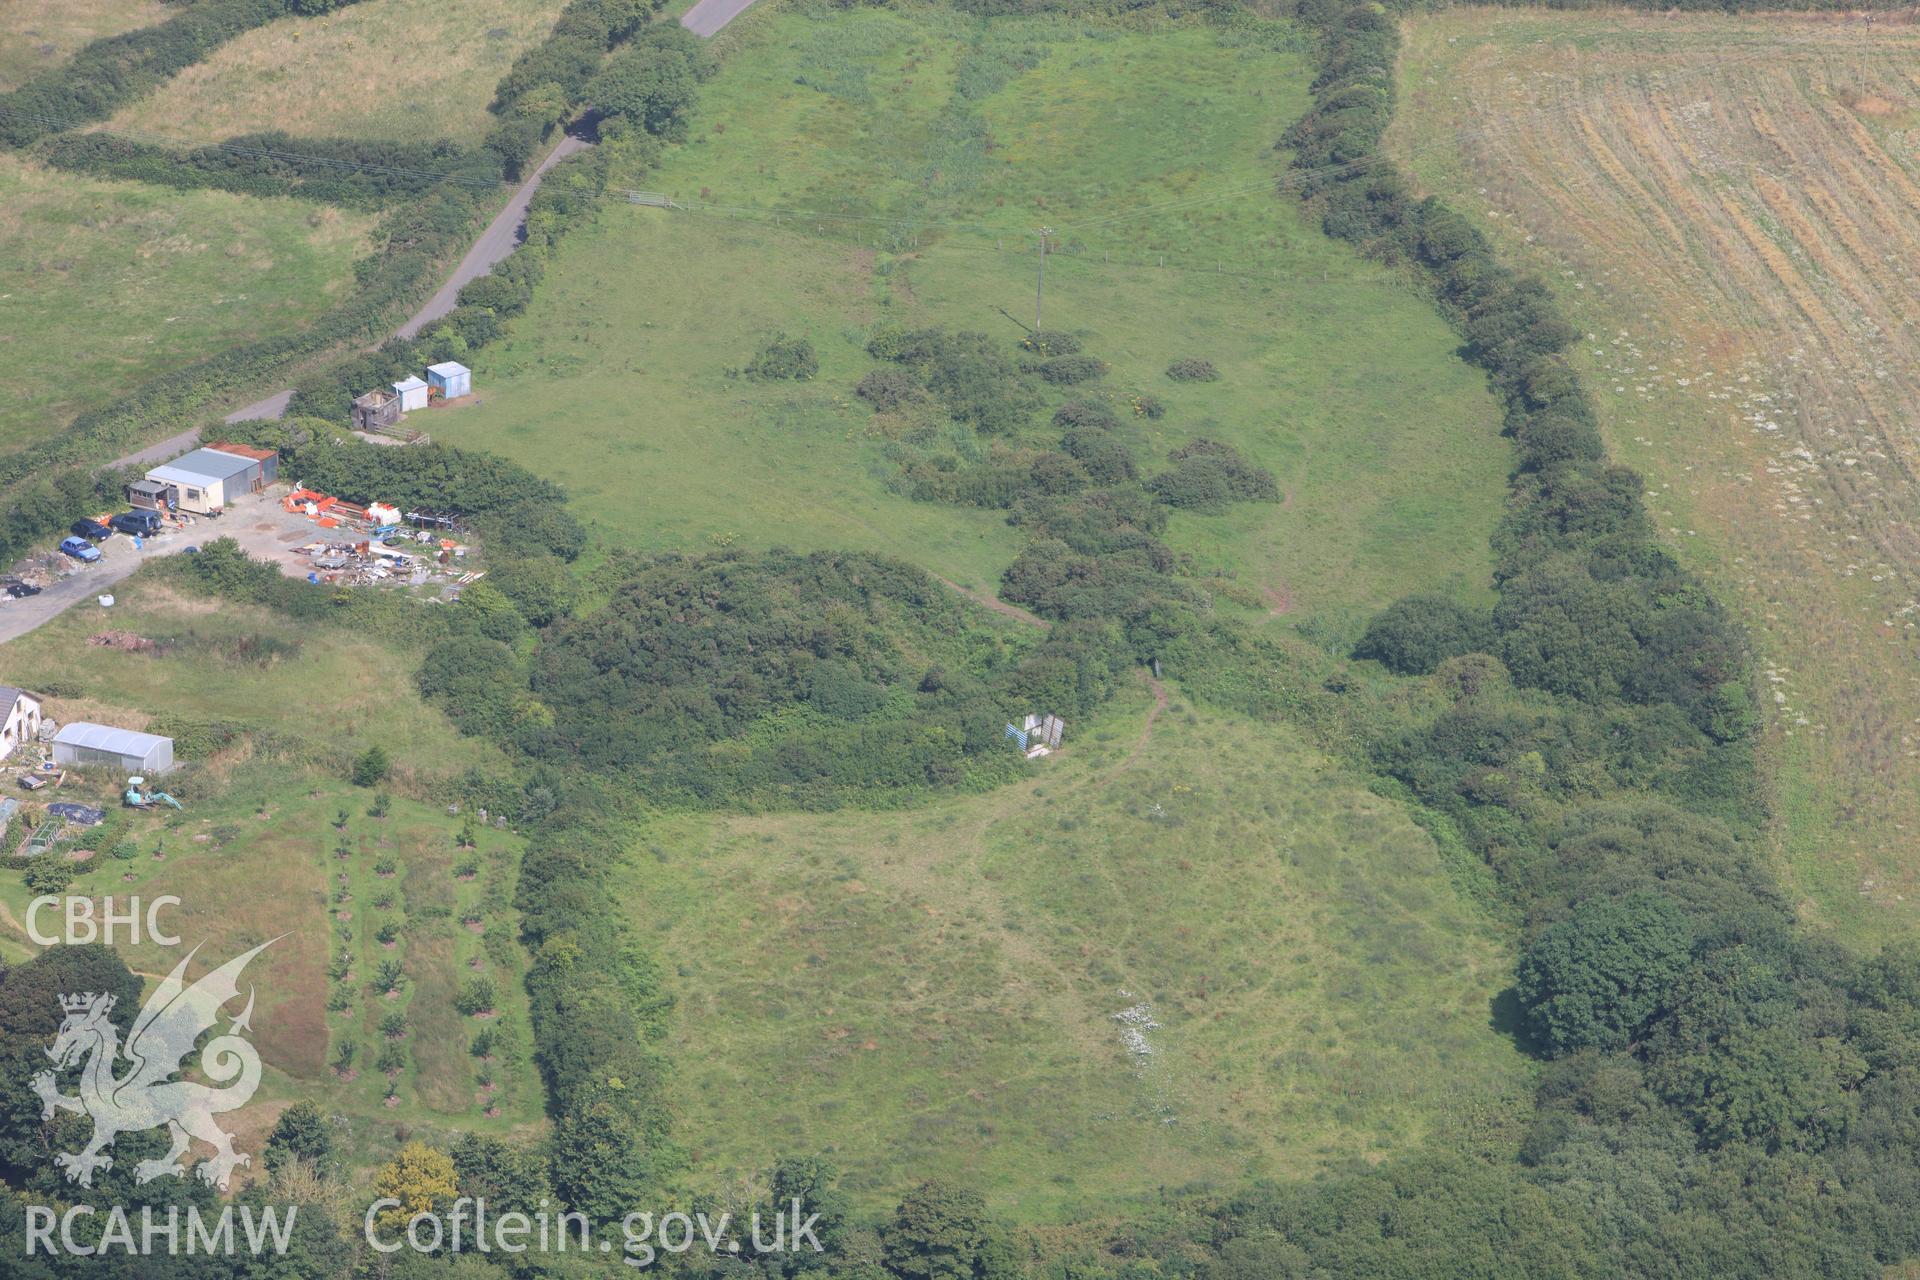 RCAHMW colour oblique photograph of St Ishmael's Tump. Taken by Toby Driver on 23/07/2010.